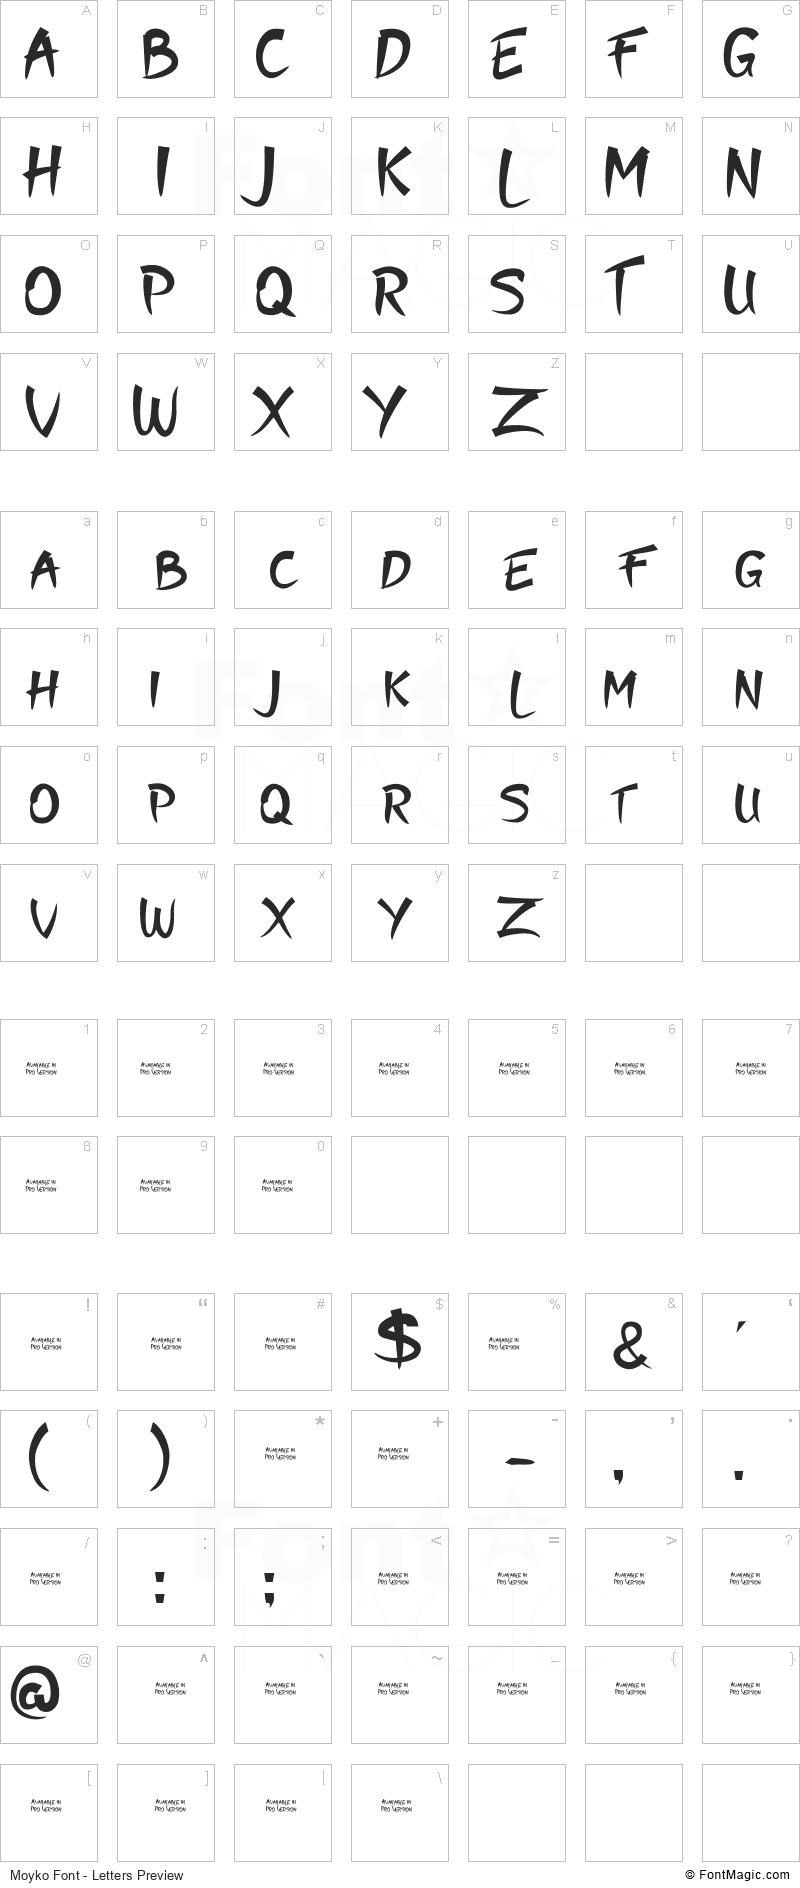 Moyko Font - All Latters Preview Chart